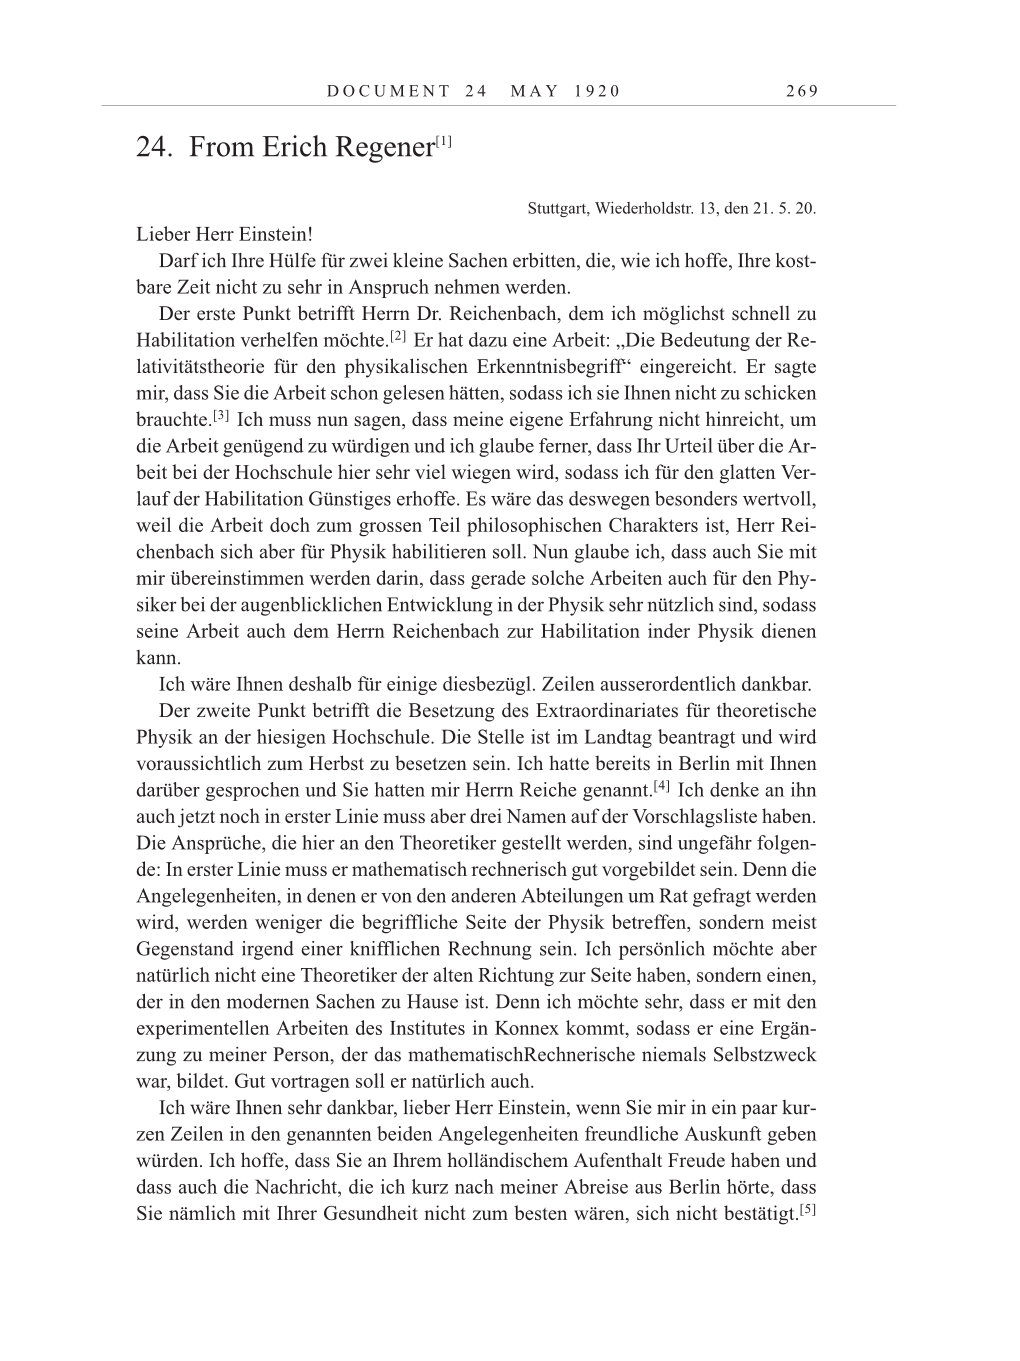 Volume 10: The Berlin Years: Correspondence May-December 1920 / Supplementary Correspondence 1909-1920 page 269